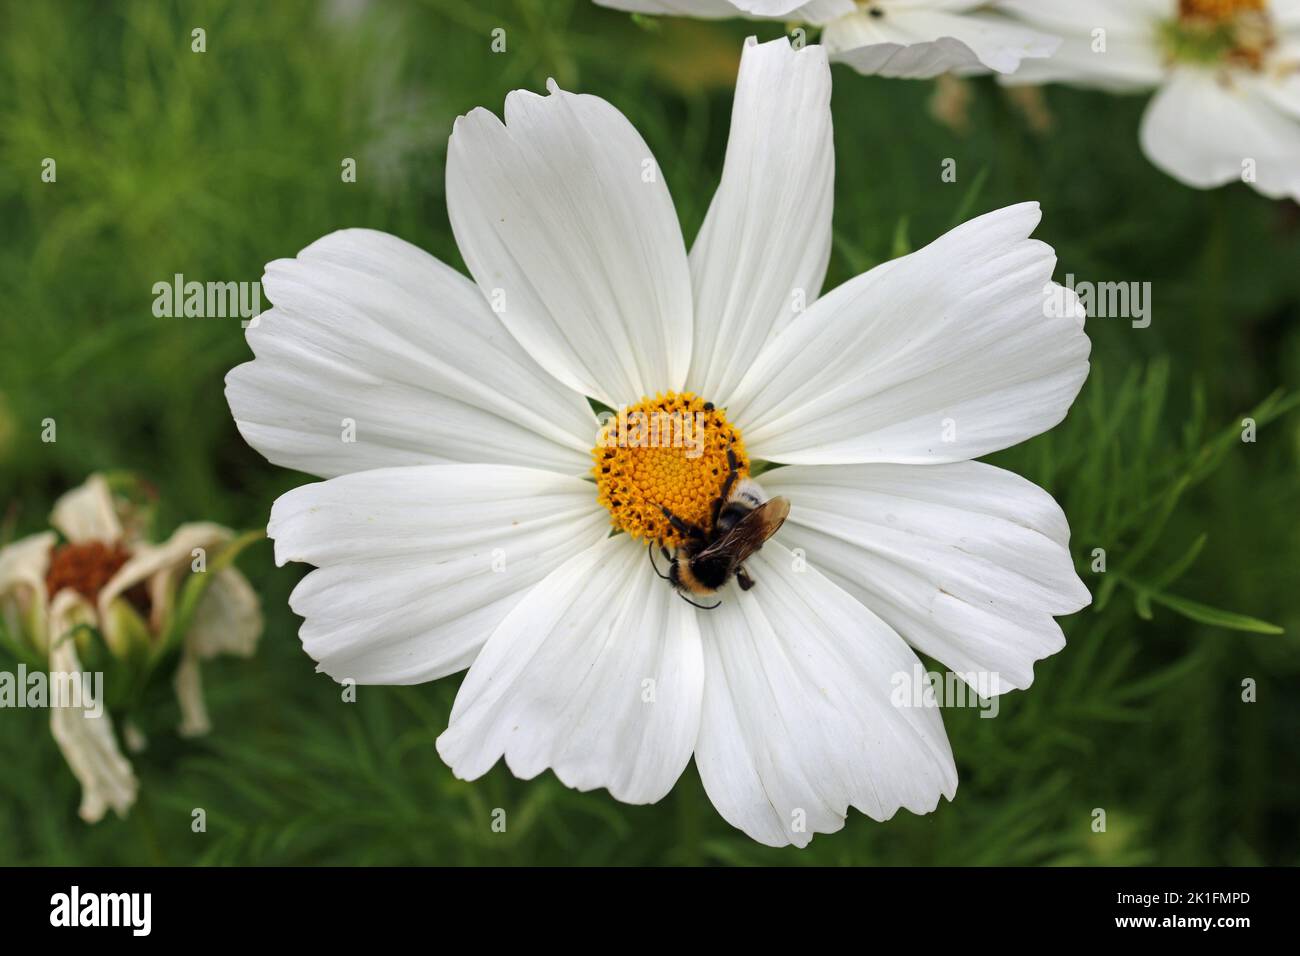 White Mexican aster flower, Cosmos bipinnatus, in close up with a bumblebee, Bombus species, and blurred leaves and flowers in the background. Stock Photo